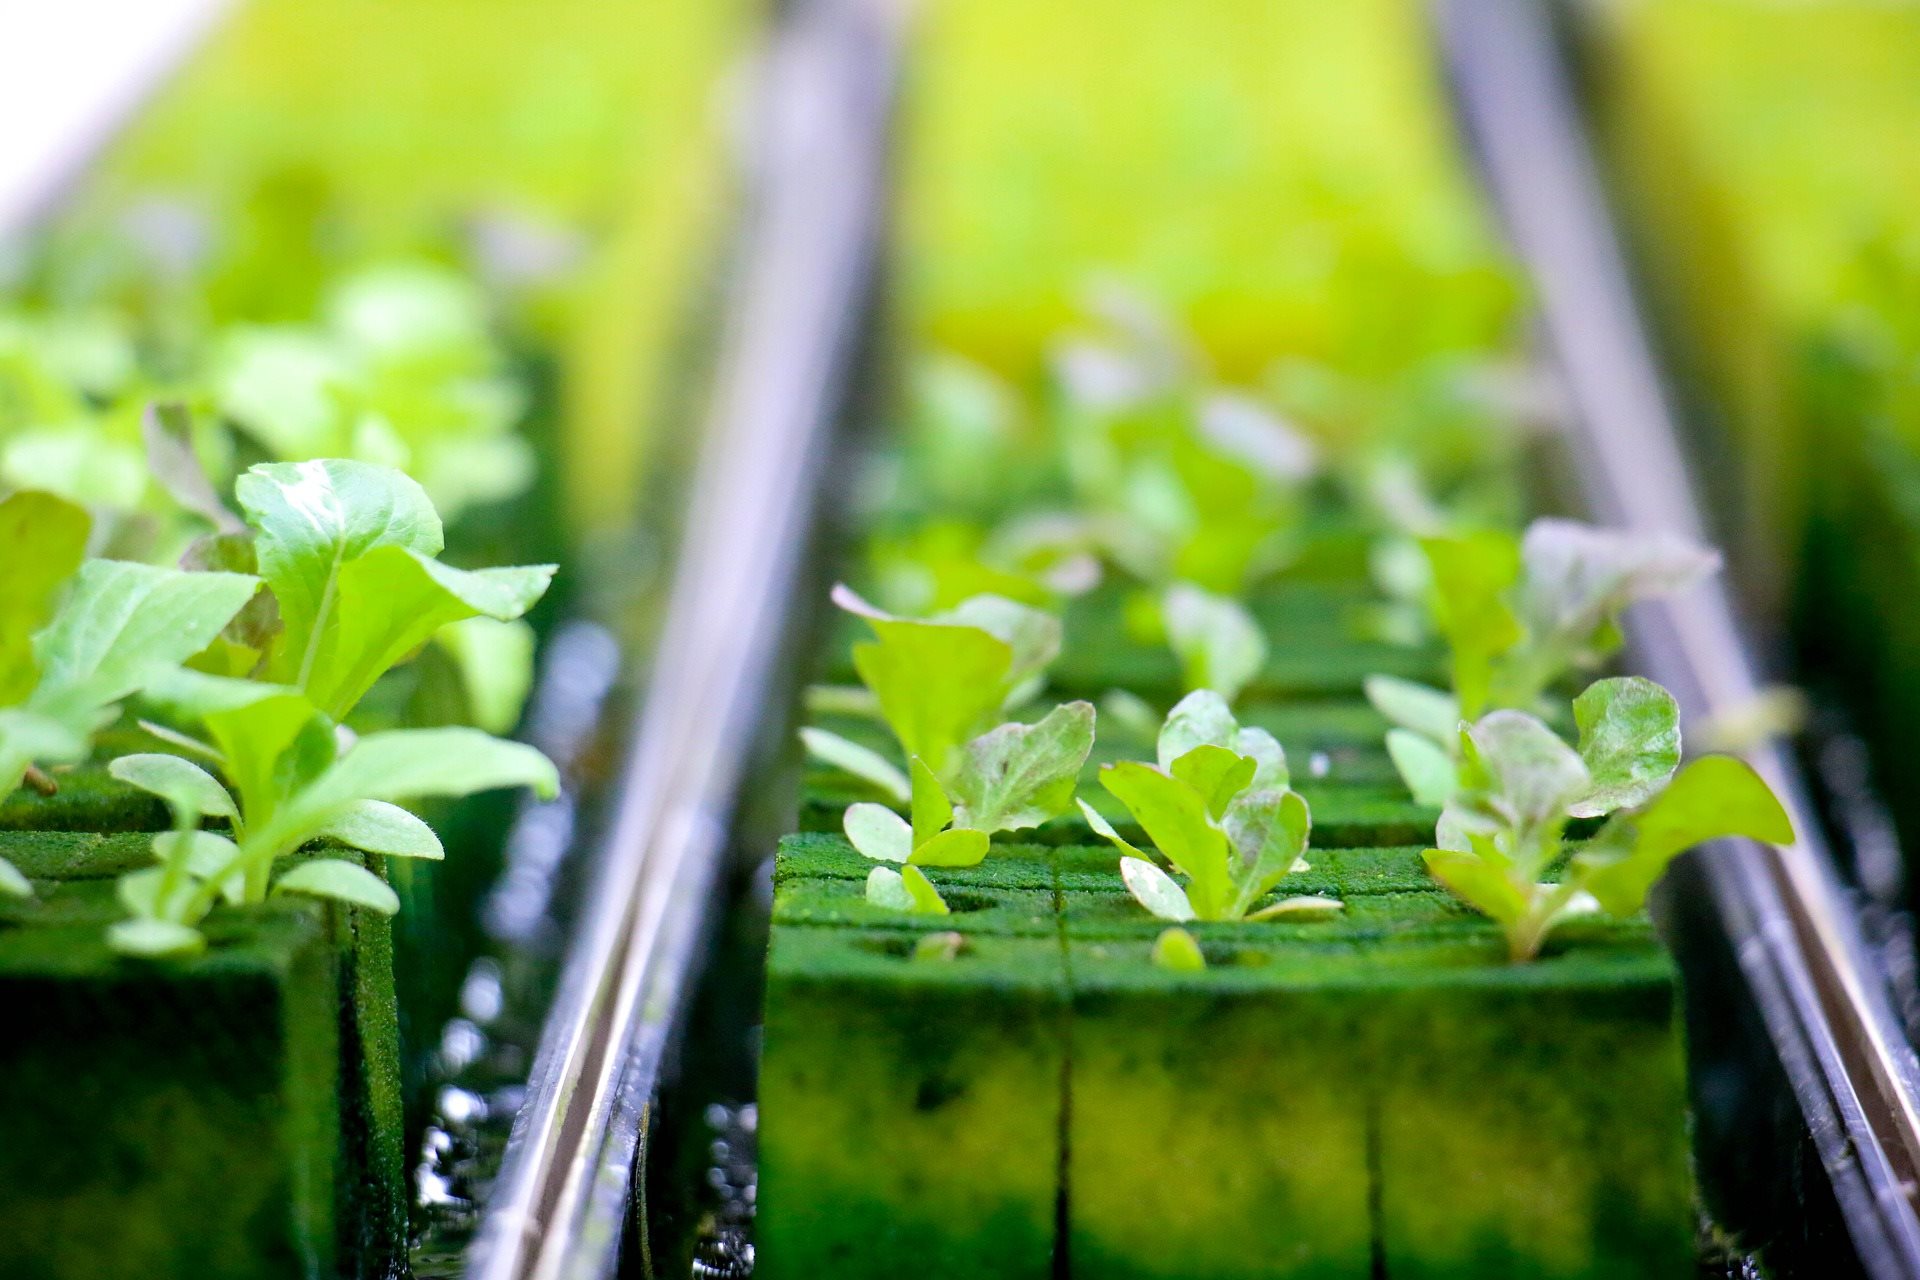 How To Use Rockwool In Hydroponics